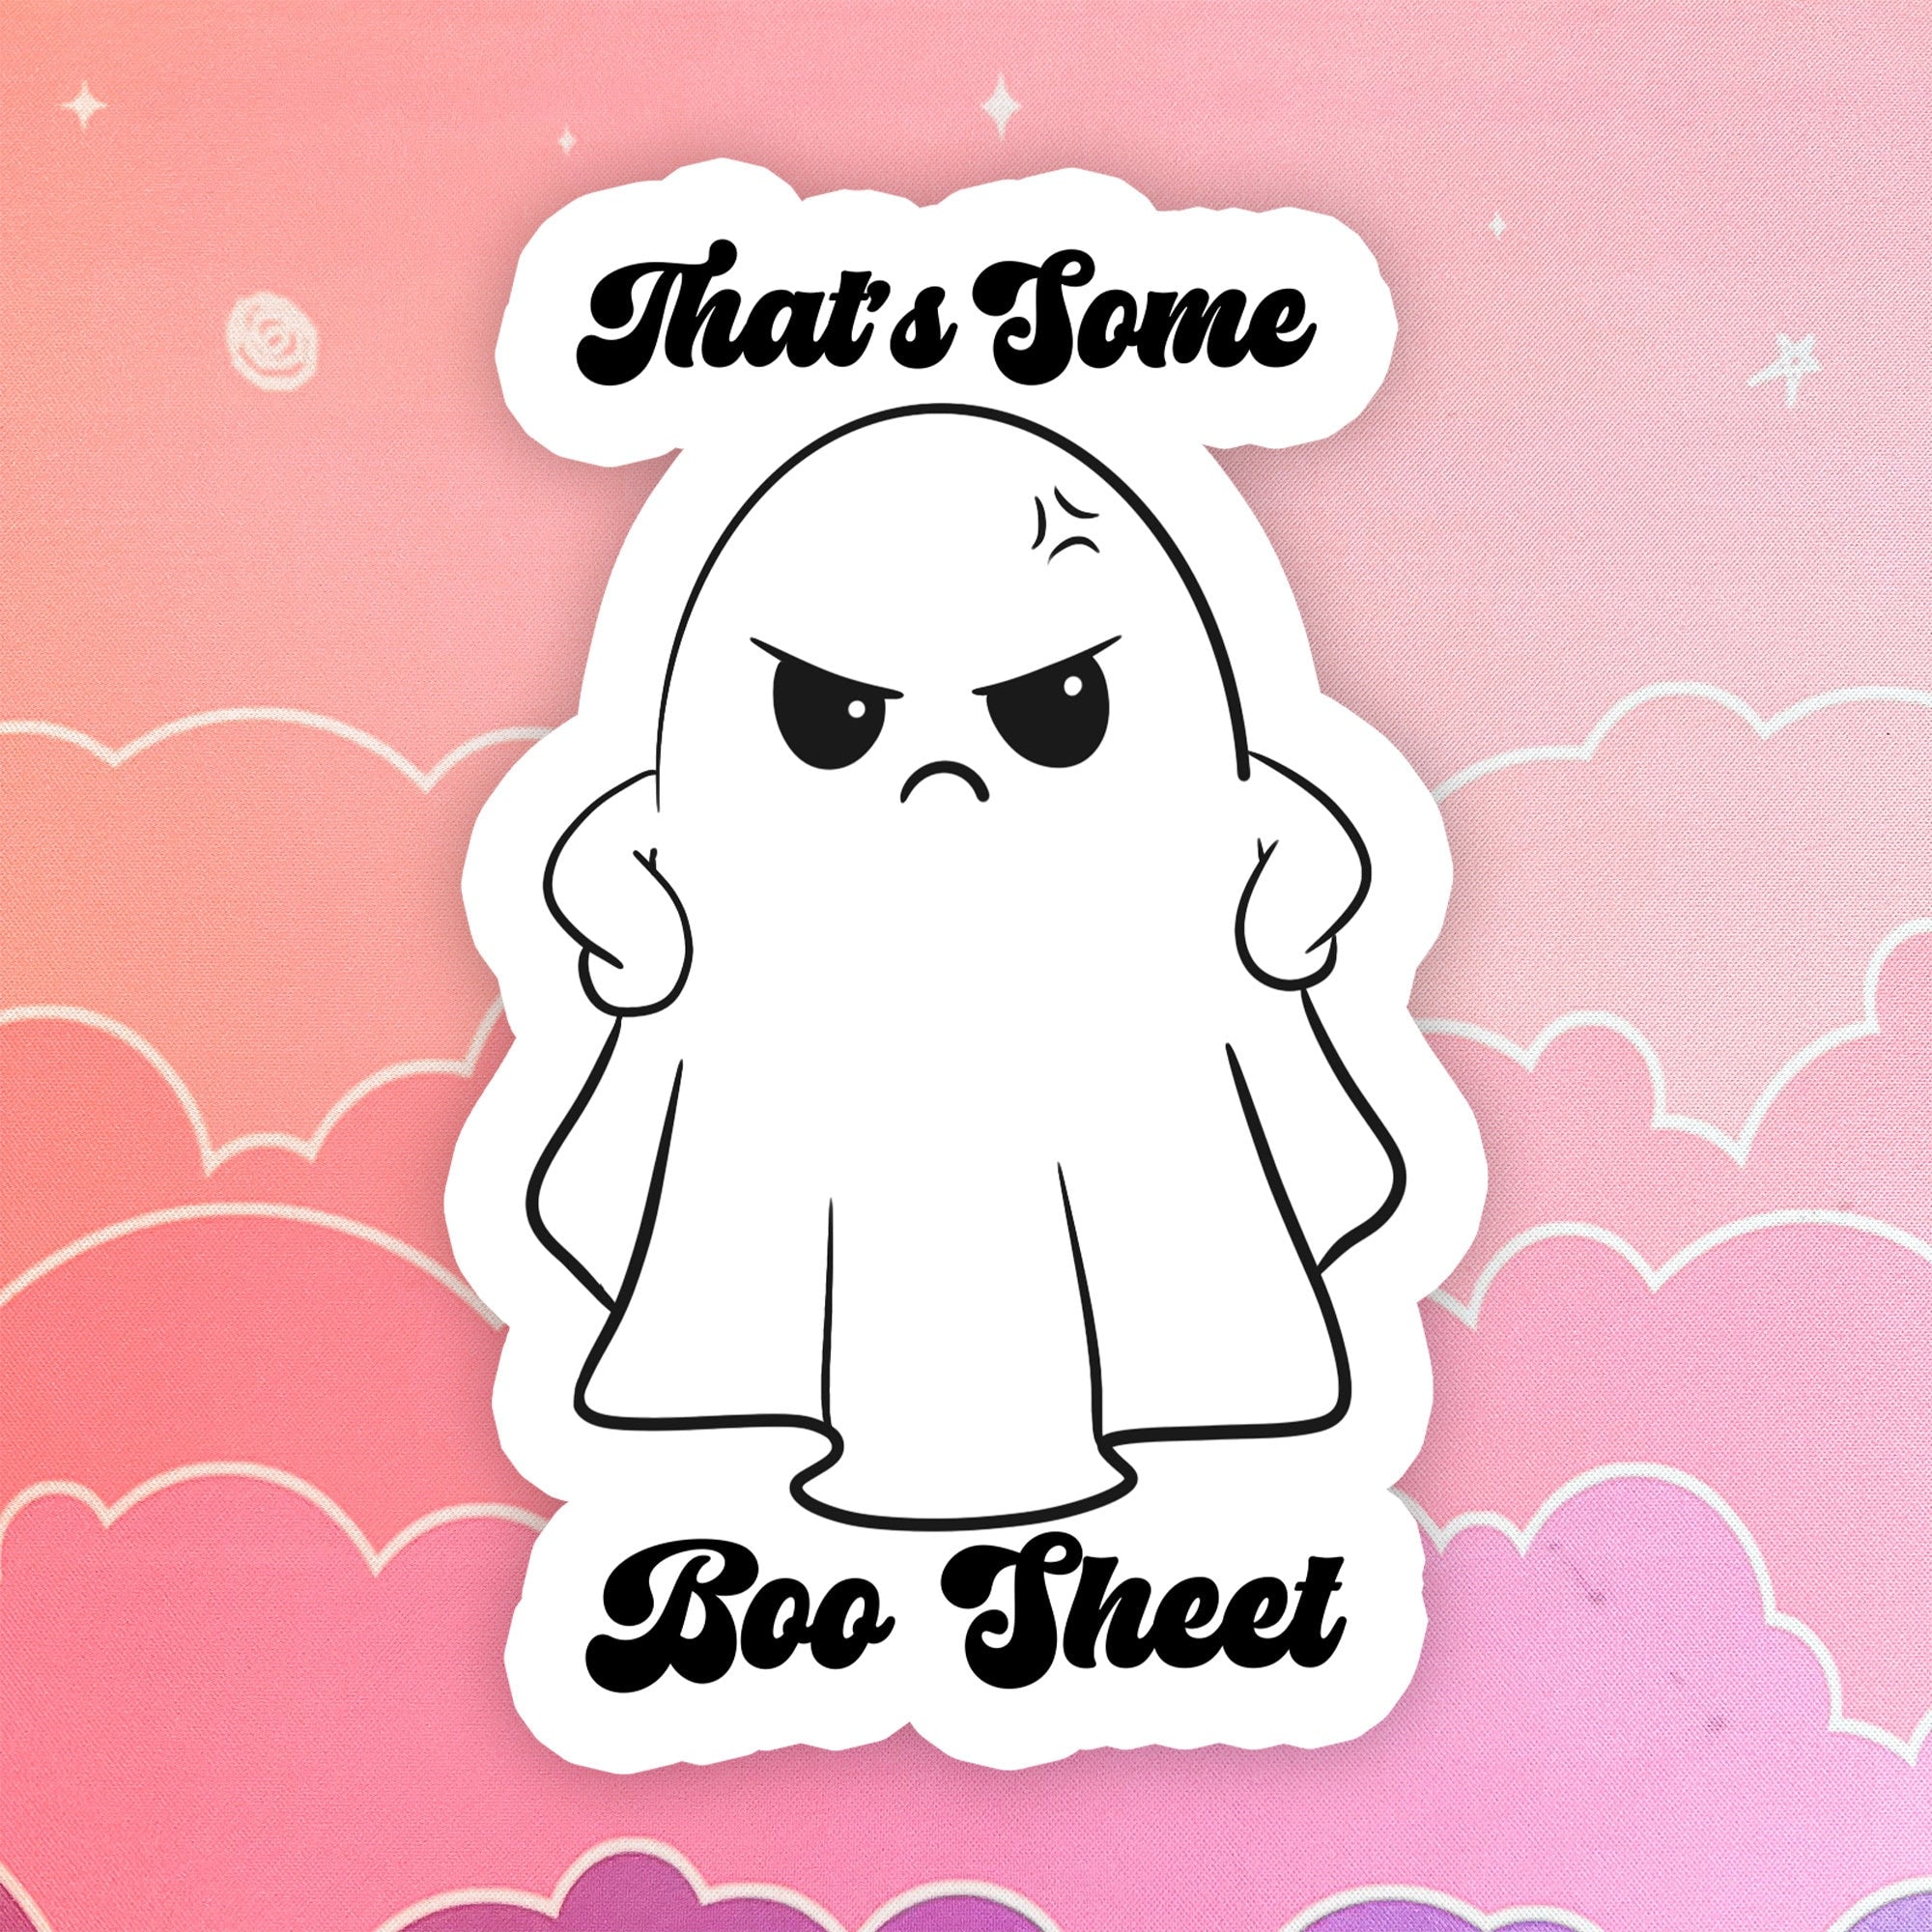 Funny Ghost sticker, Halloween stickers, spooky season, boo sheet, funny Halloween quotes, cute ghost, punny stickers, water bottle stickers